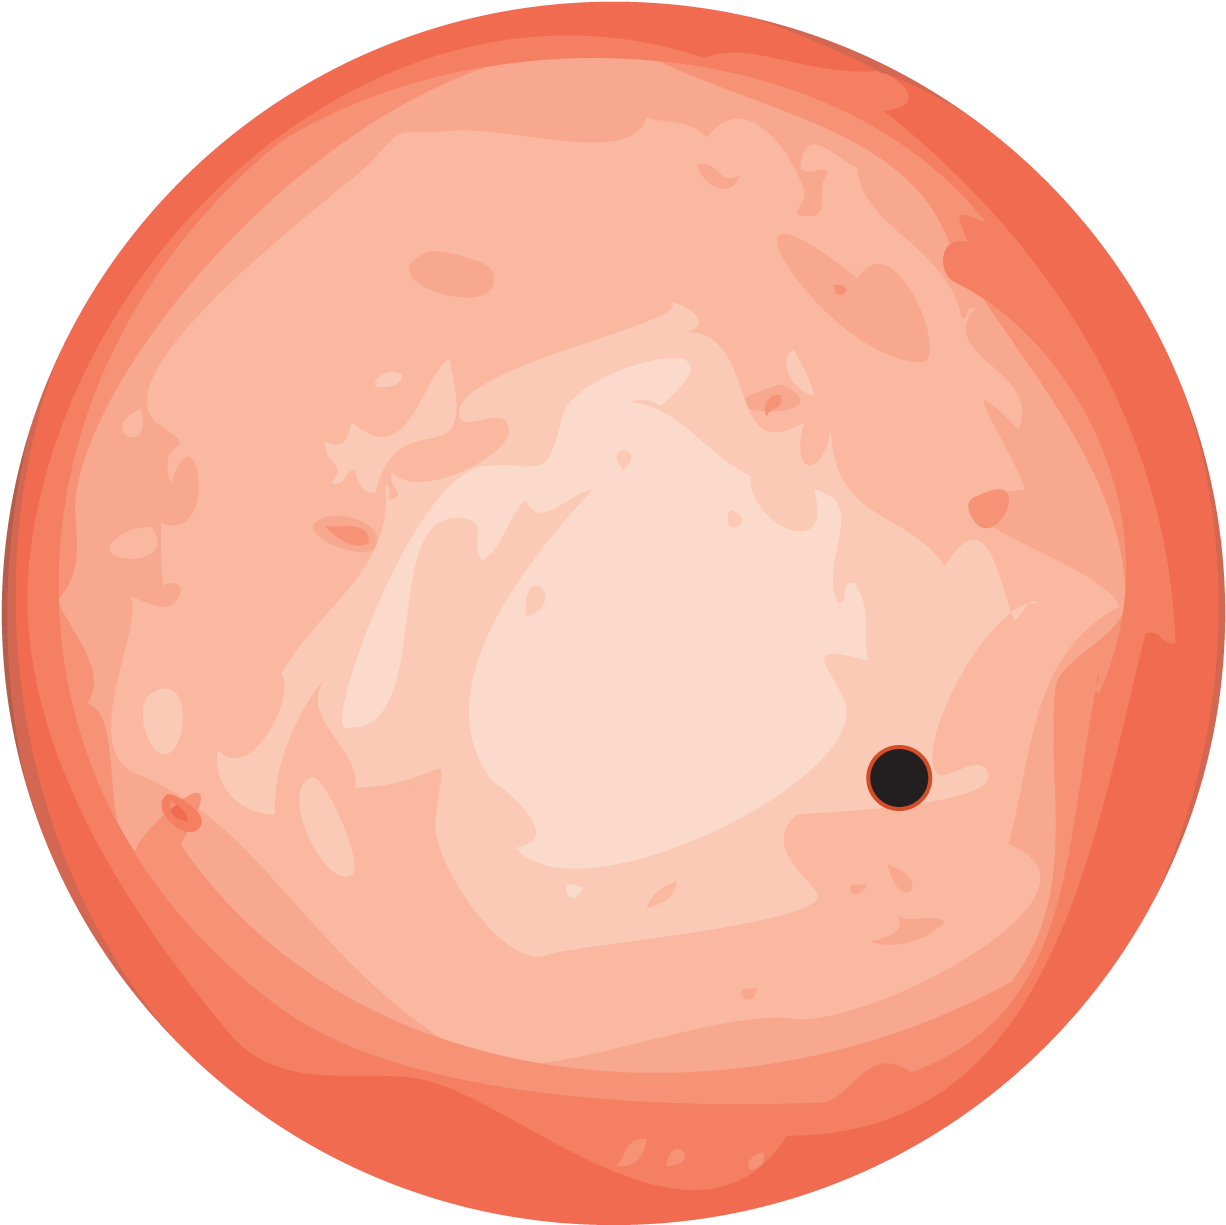 A Red Planet With A Black Circle